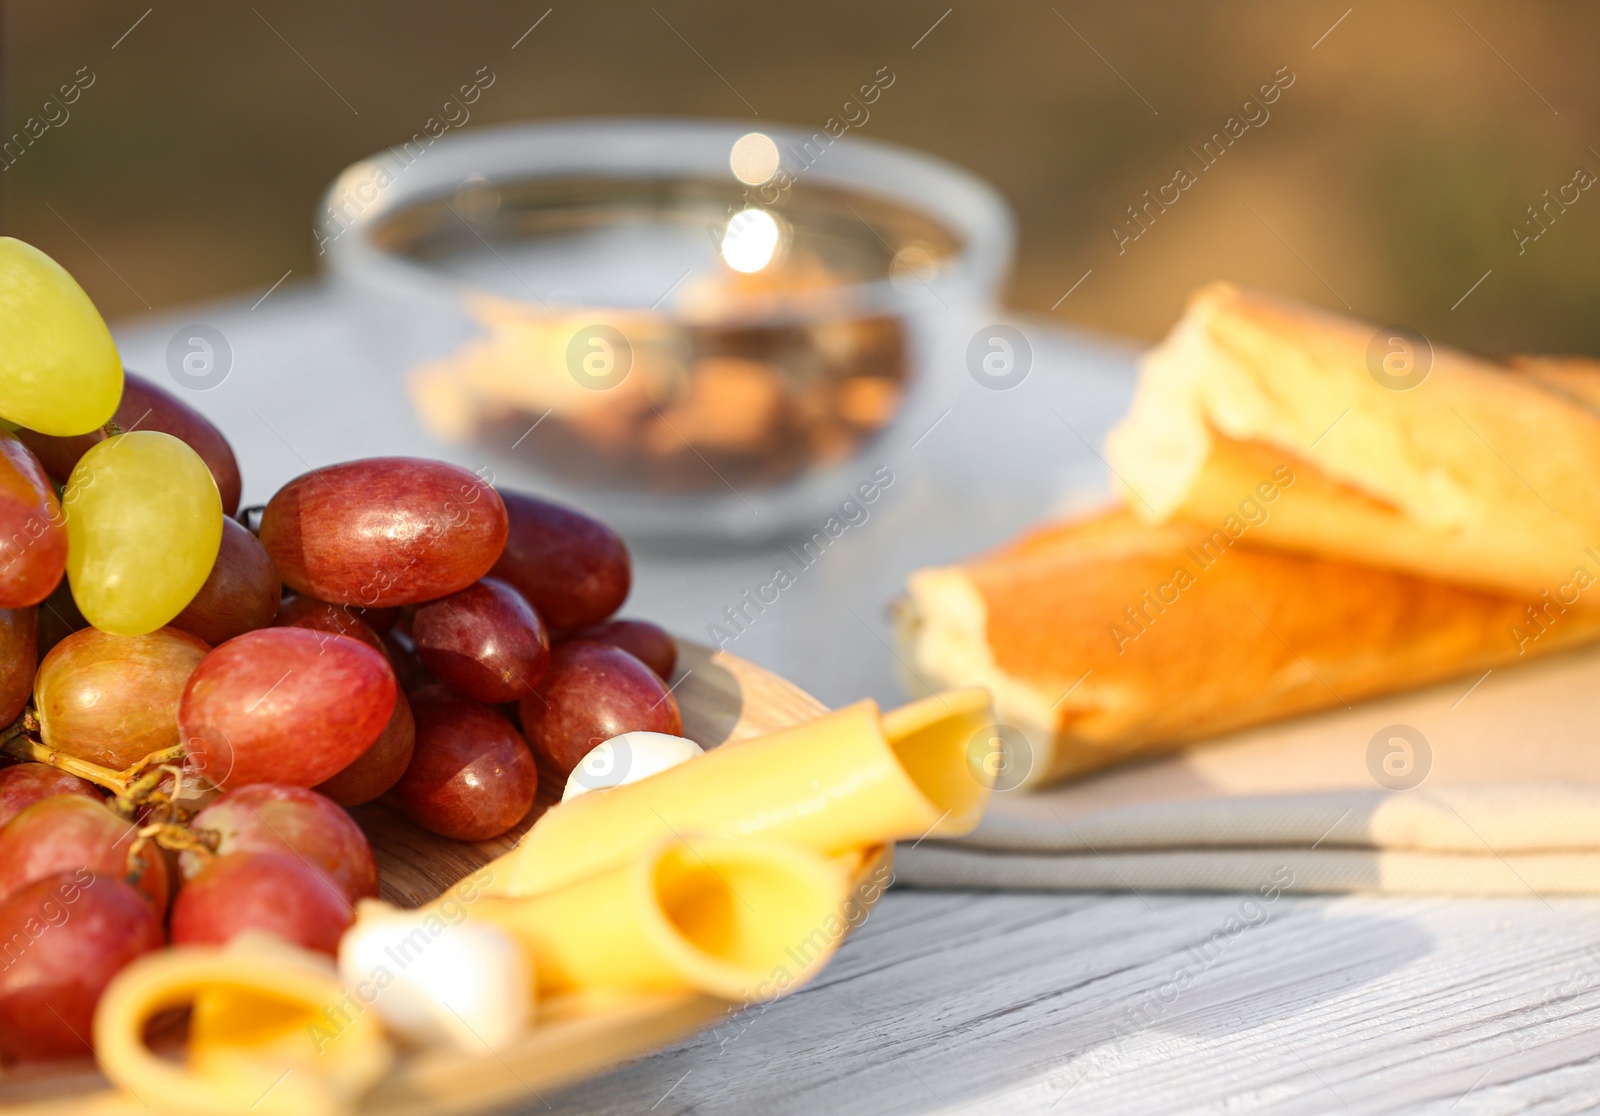 Photo of Plate with cheese and grapes on white wooden table outdoors, closeup view